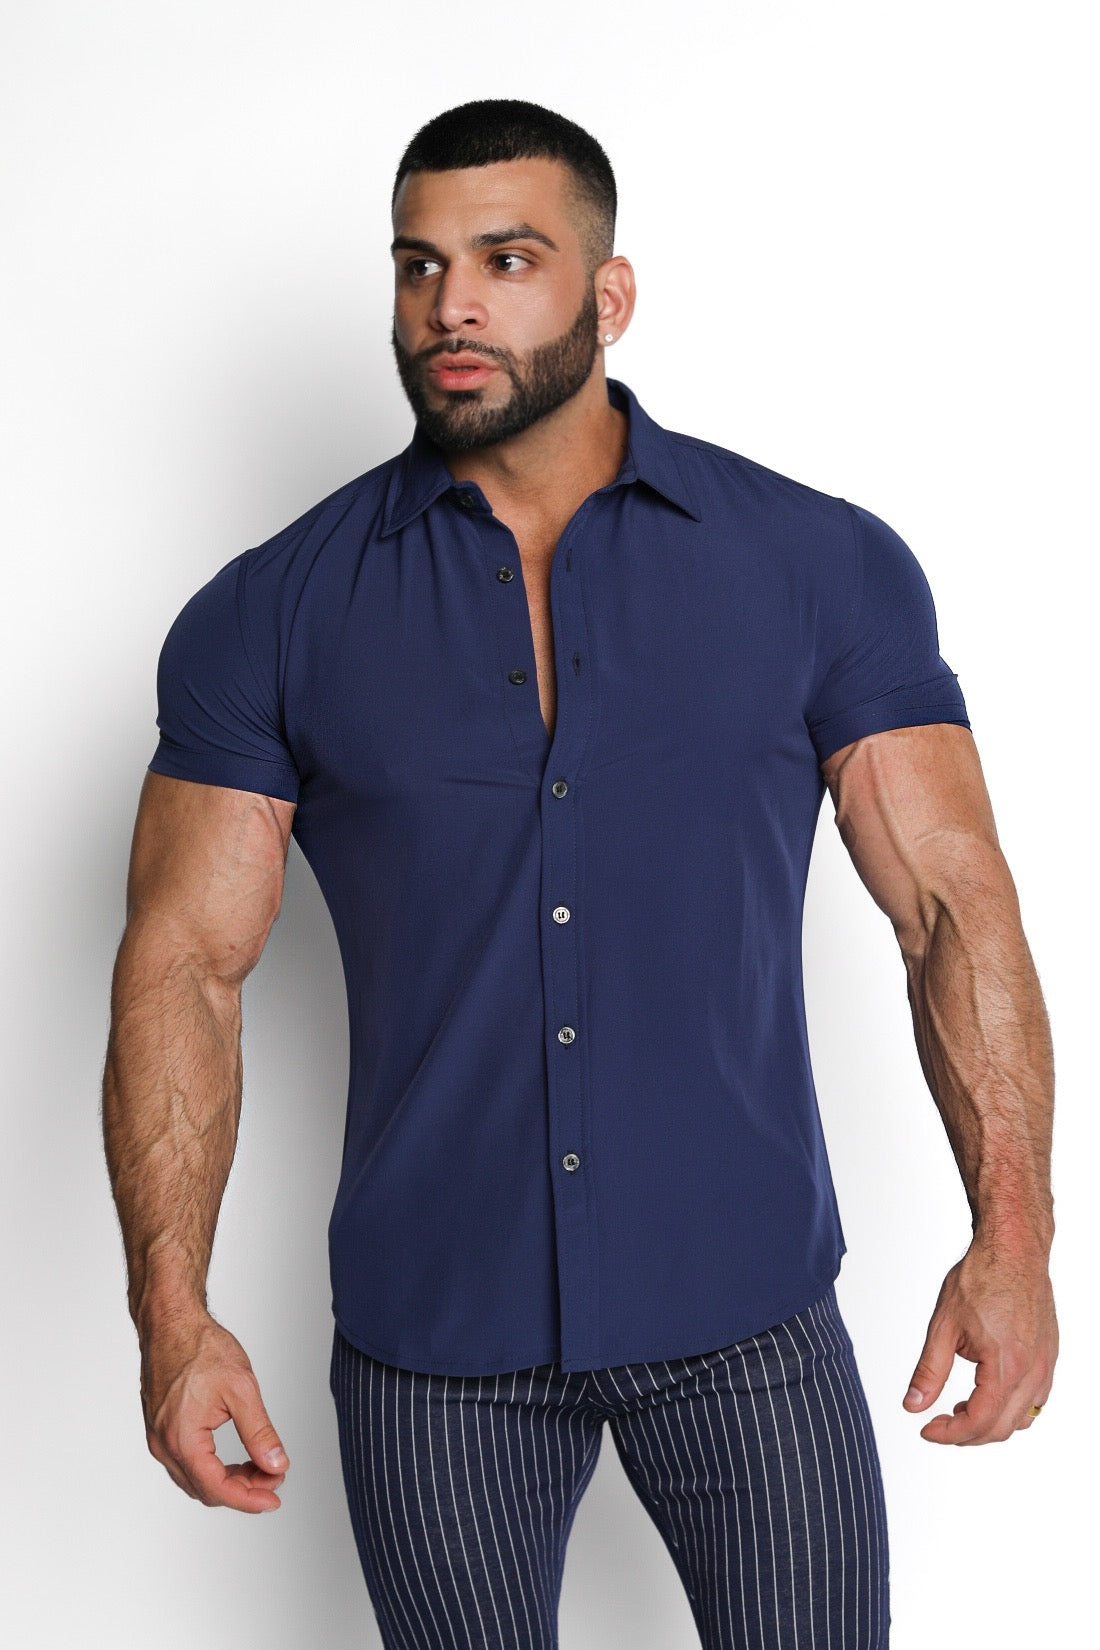 Mens Athletic Fit & Muscle Fit Dress Shirts - Dress Shirts For Men By Gerardo Collection